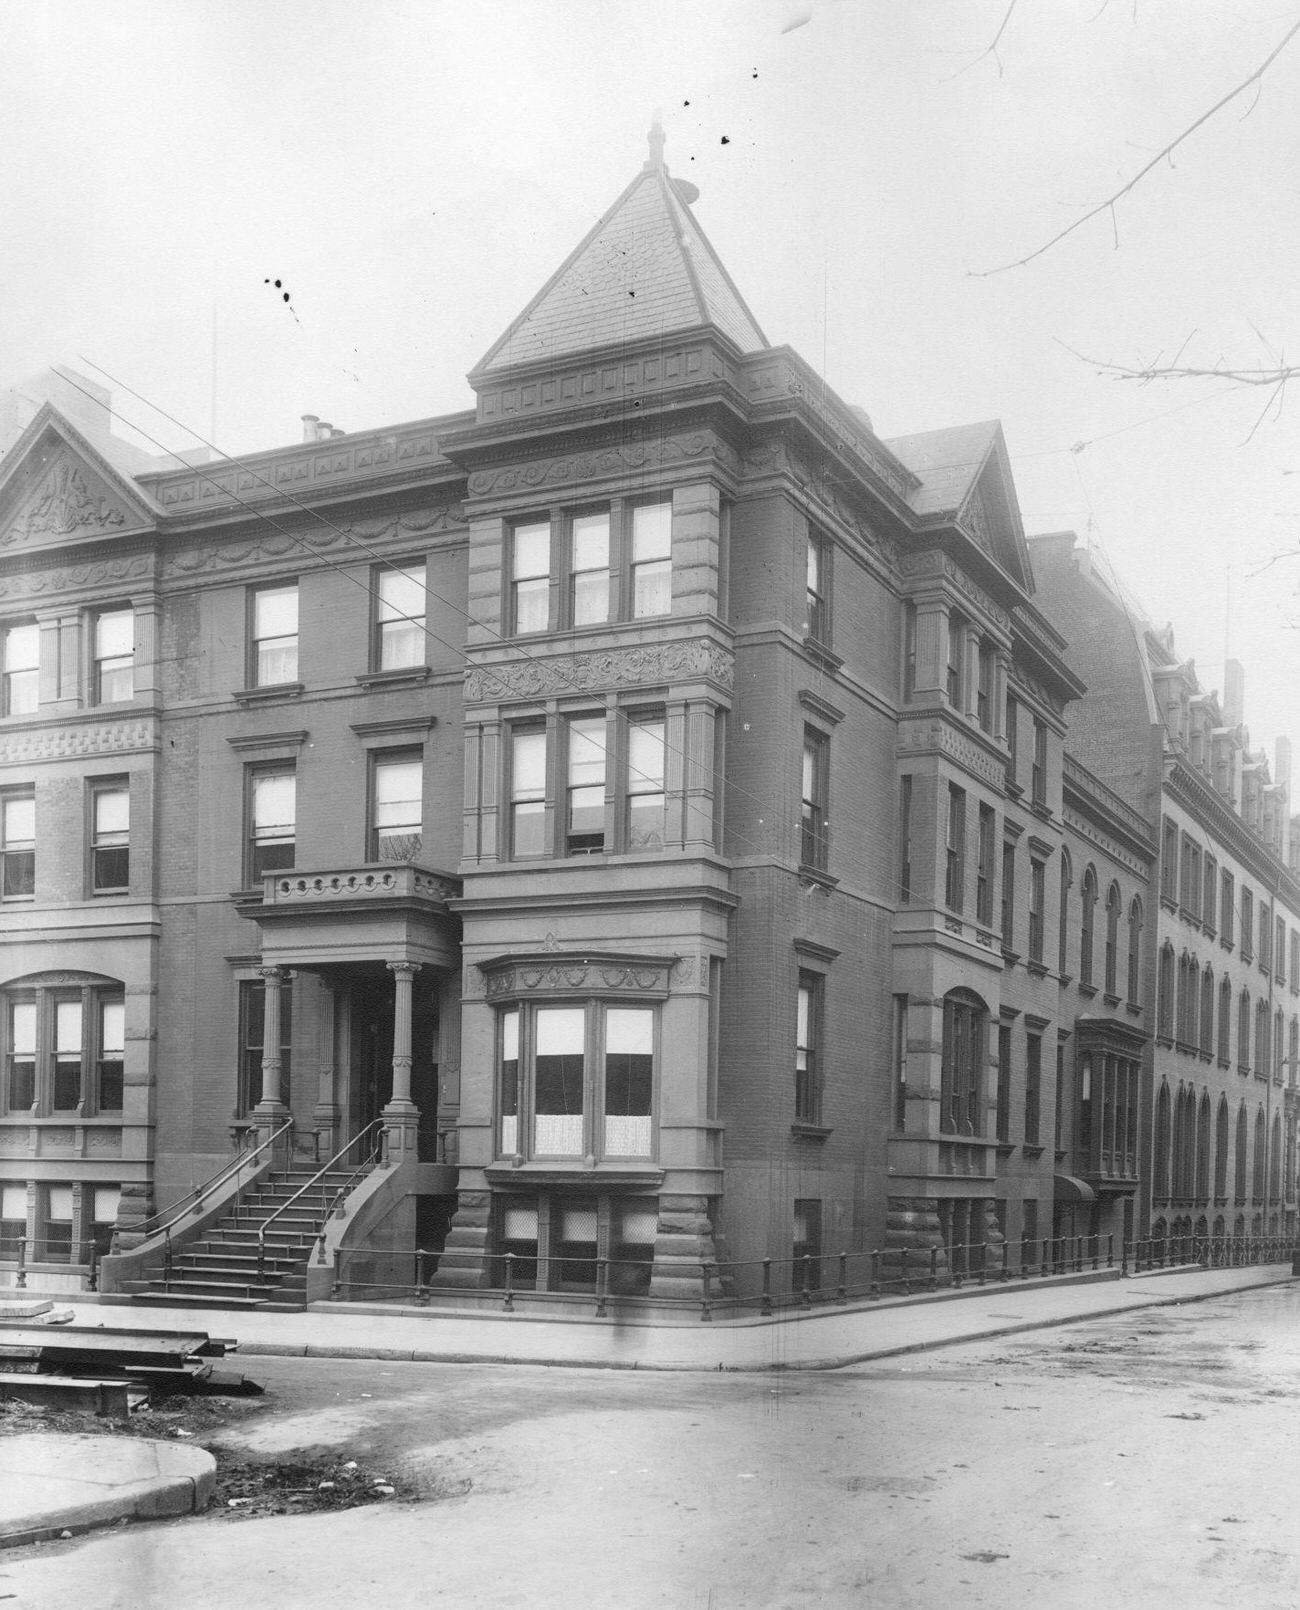 Unidentified House At Clinton And Pierrepont Streets, Brooklyn, 1895